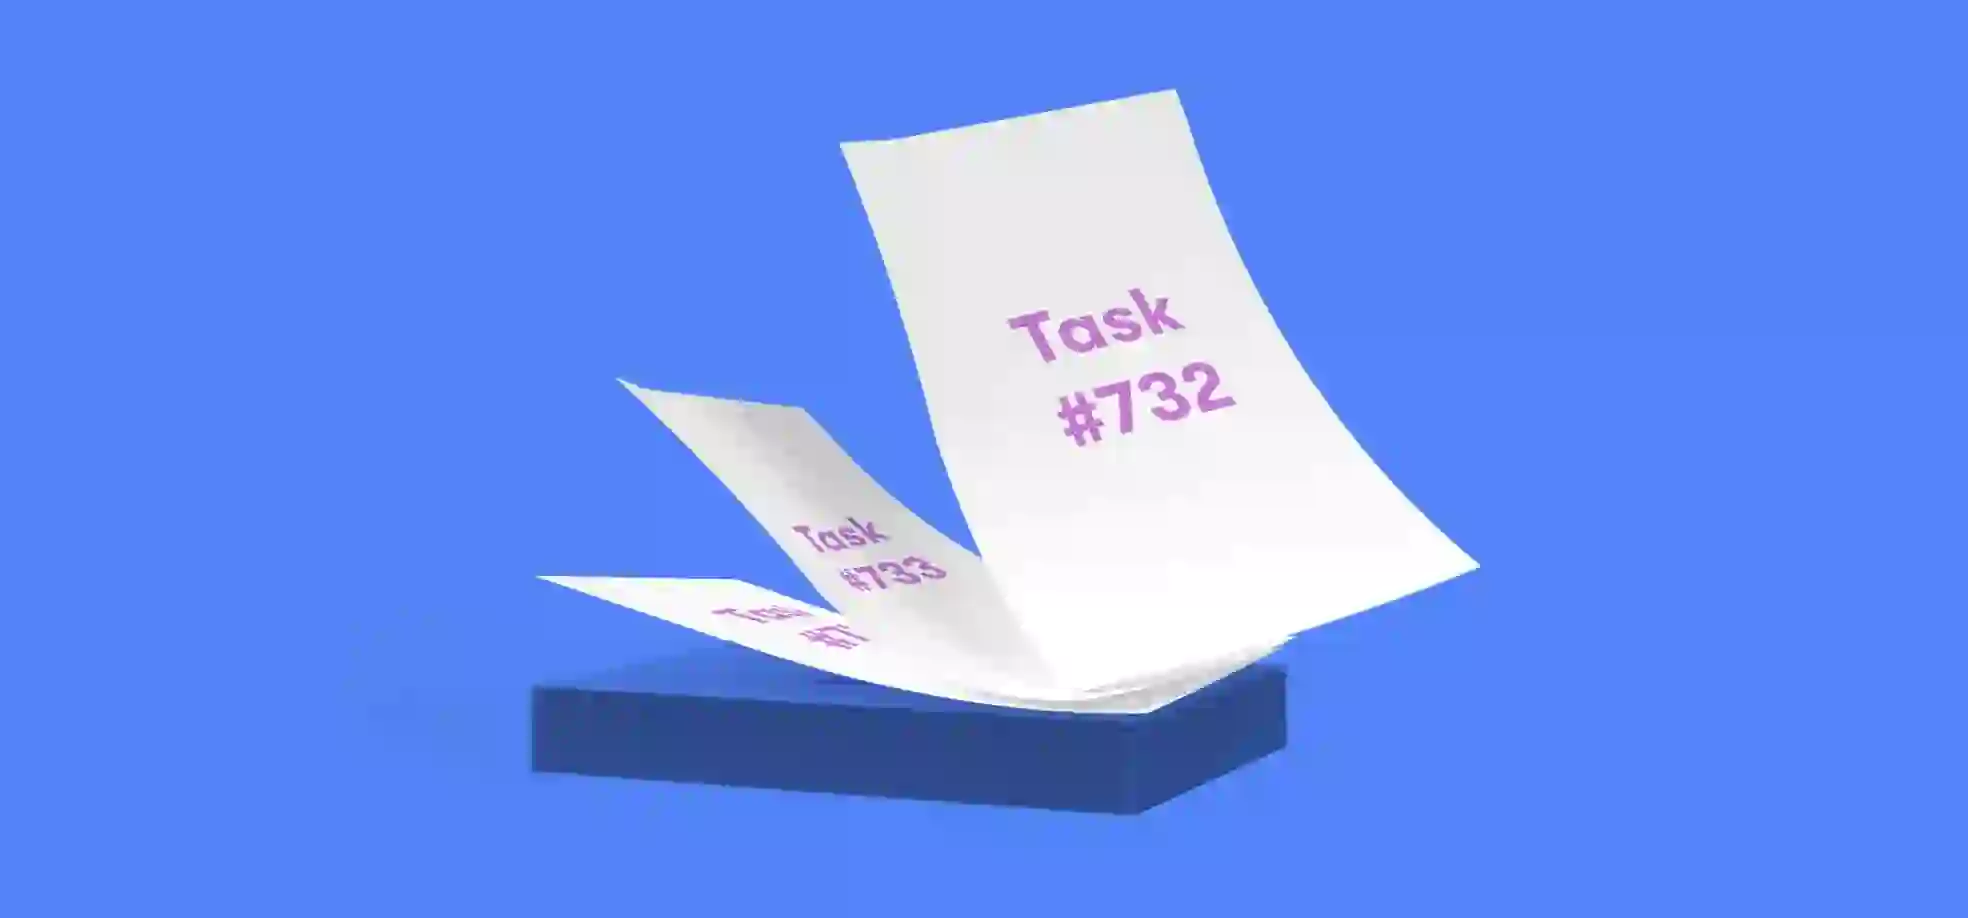 a stack of paper sheets illustration on a blue background